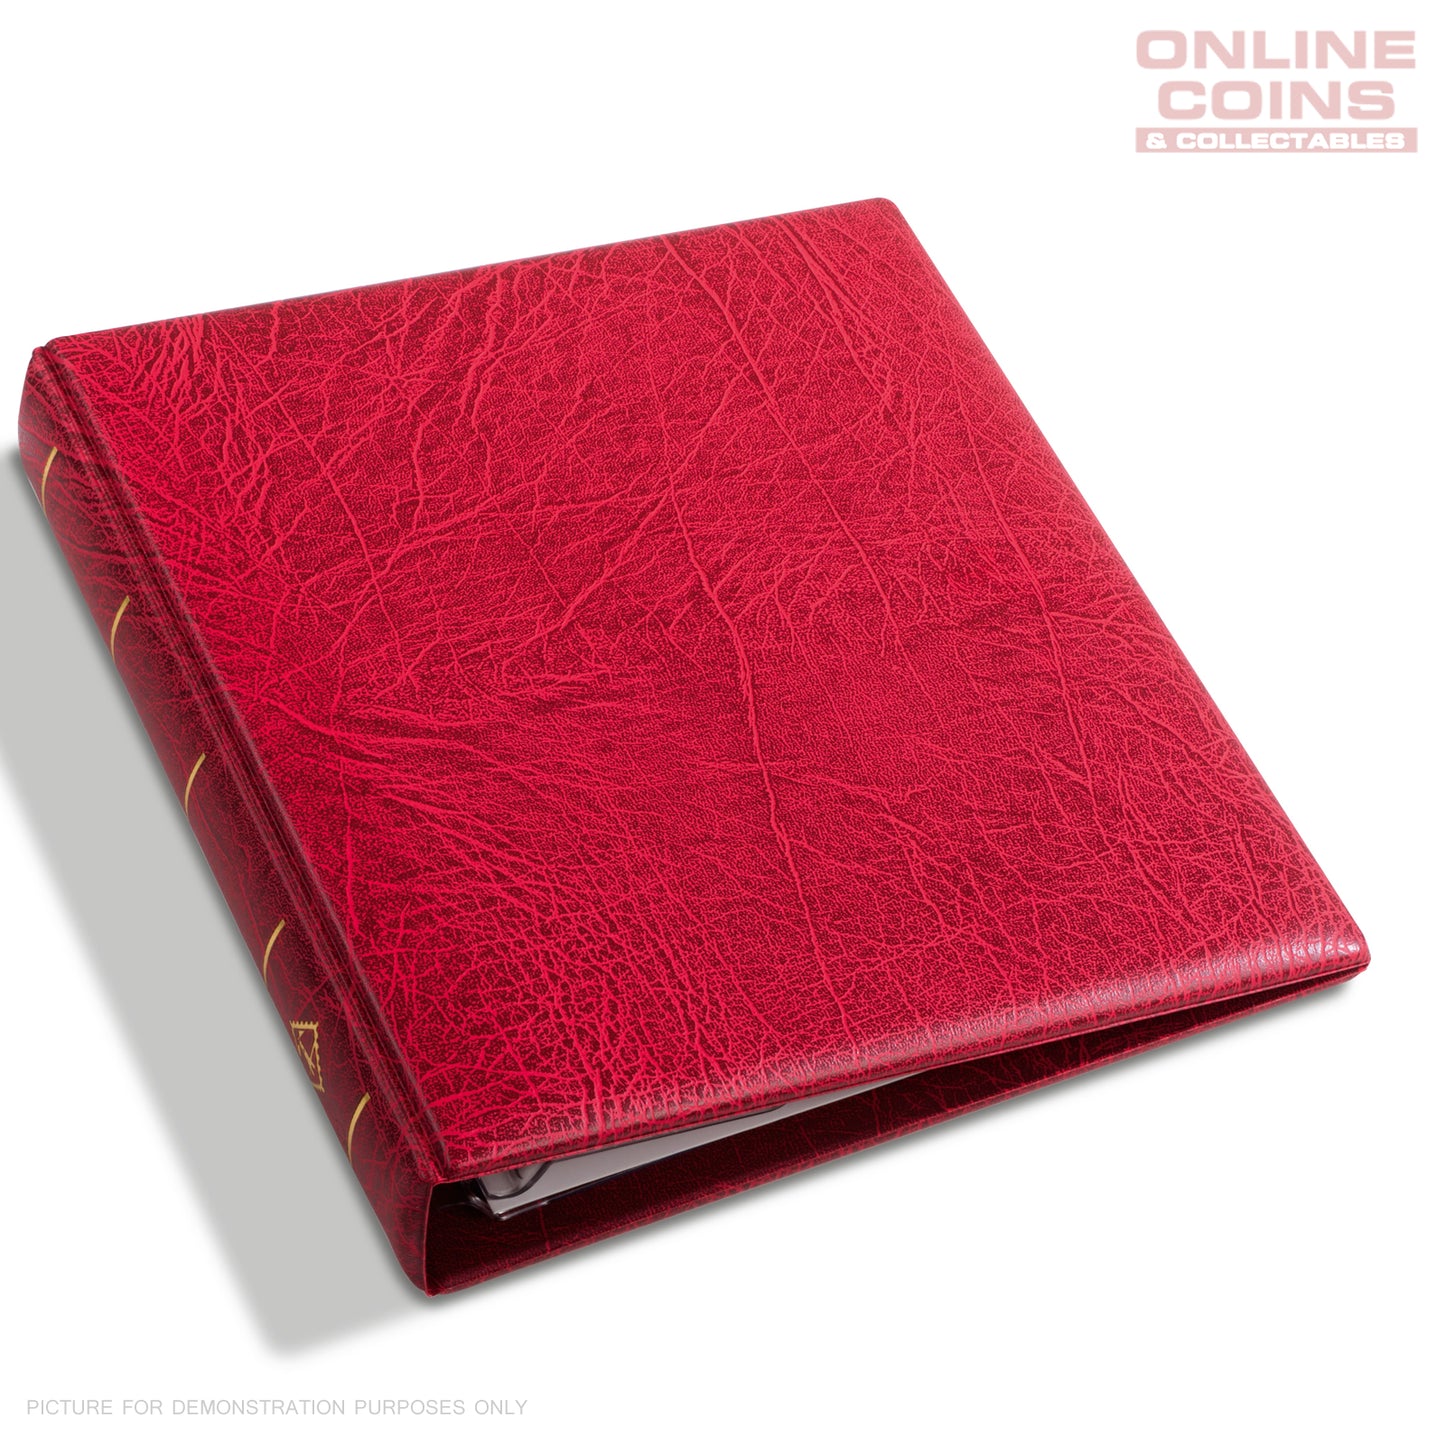 Lighthouse - OPTIMA F Binder and Slipcase for Coins, Stamps & Banknotes - RED